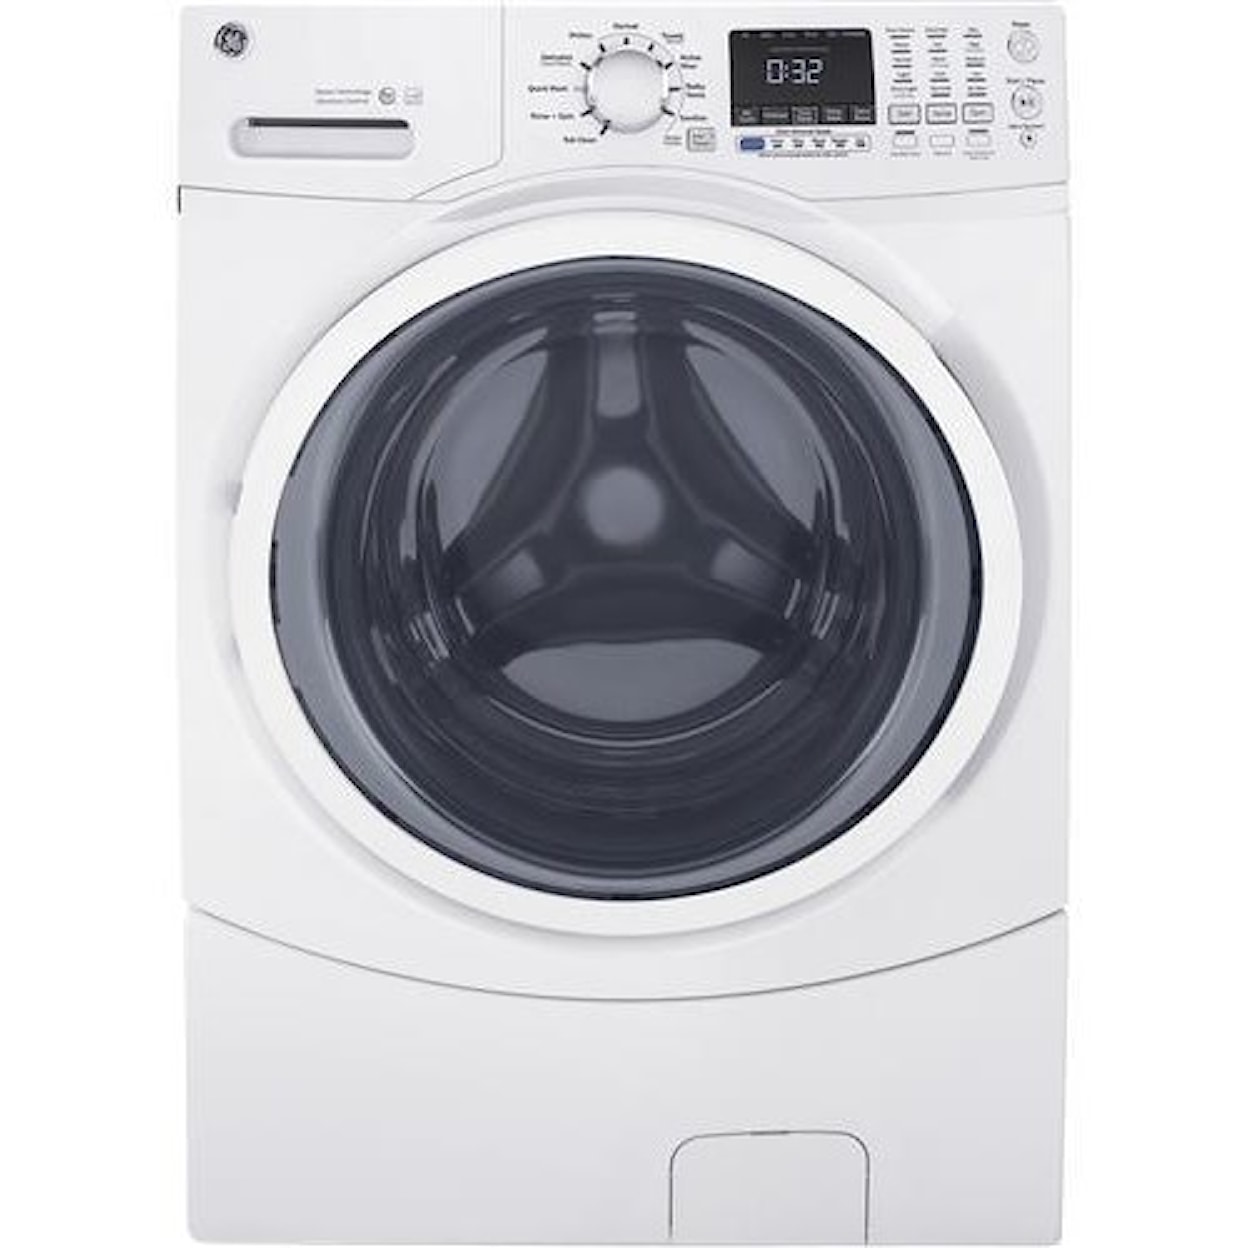 GE Appliances Front Load Washers - GE Front Load Washer